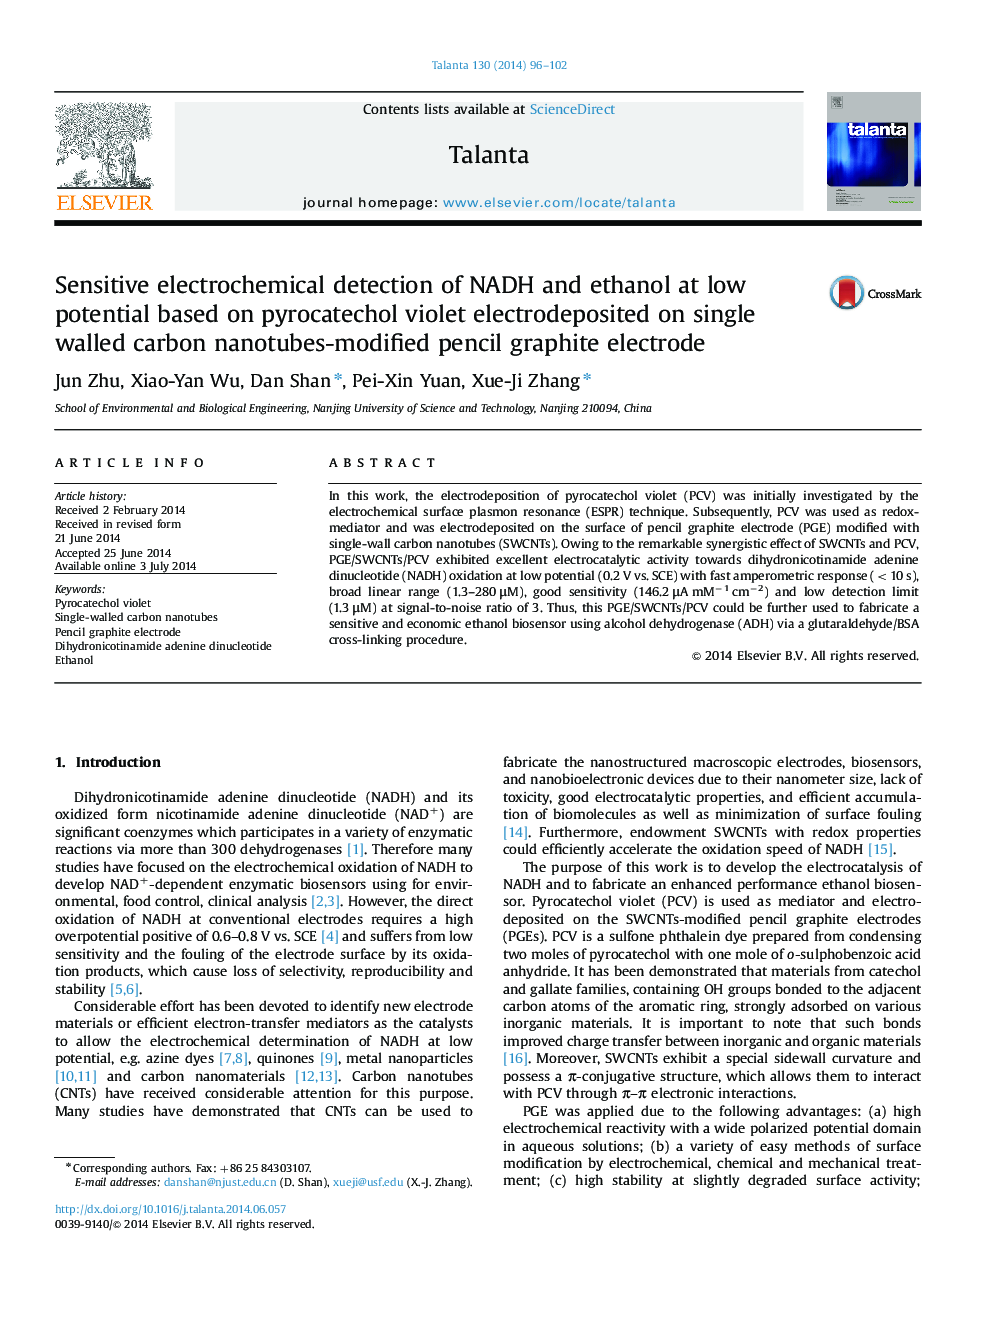 Sensitive electrochemical detection of NADH and ethanol at low potential based on pyrocatechol violet electrodeposited on single walled carbon nanotubes-modified pencil graphite electrode